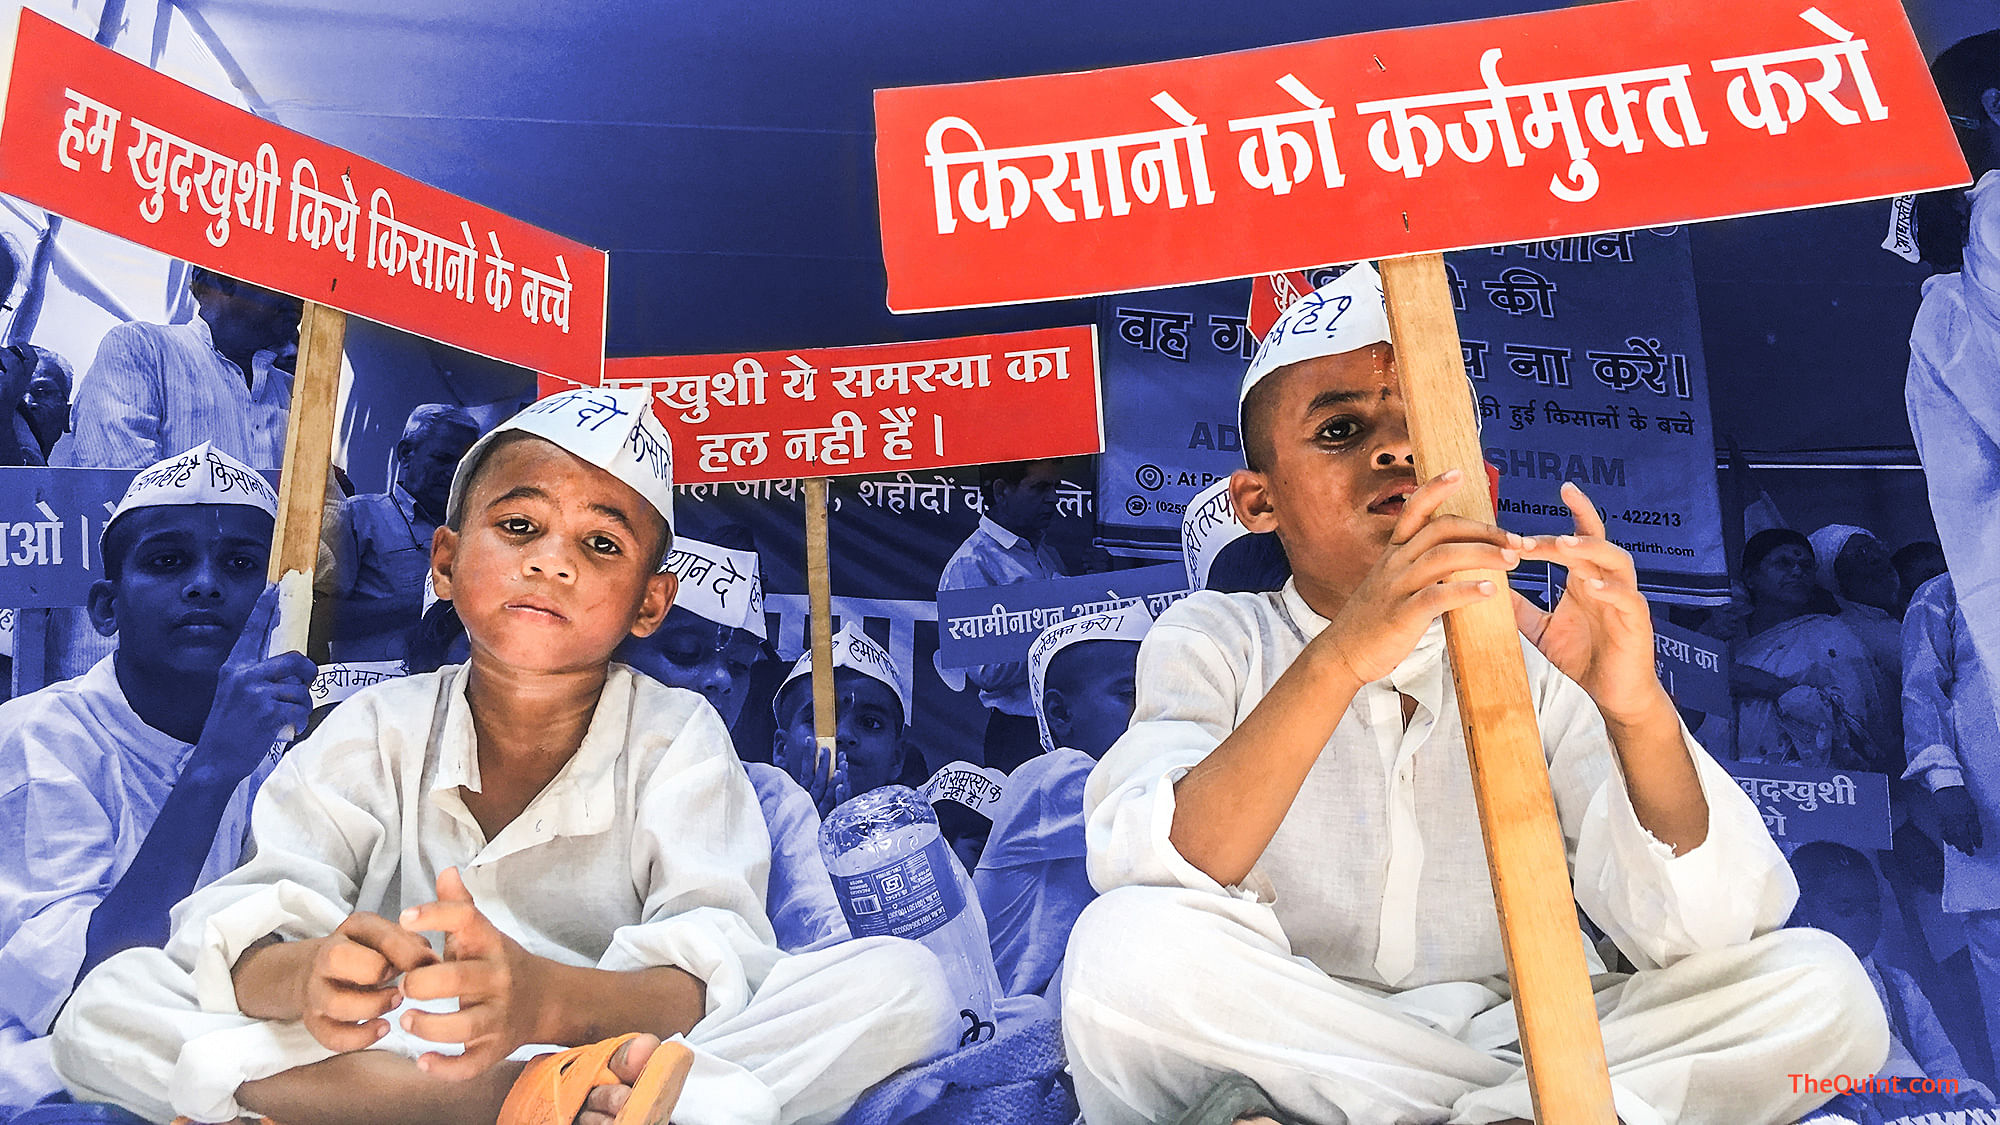 Children of farmers who took their lives, at a protest in Delhi in 2017.